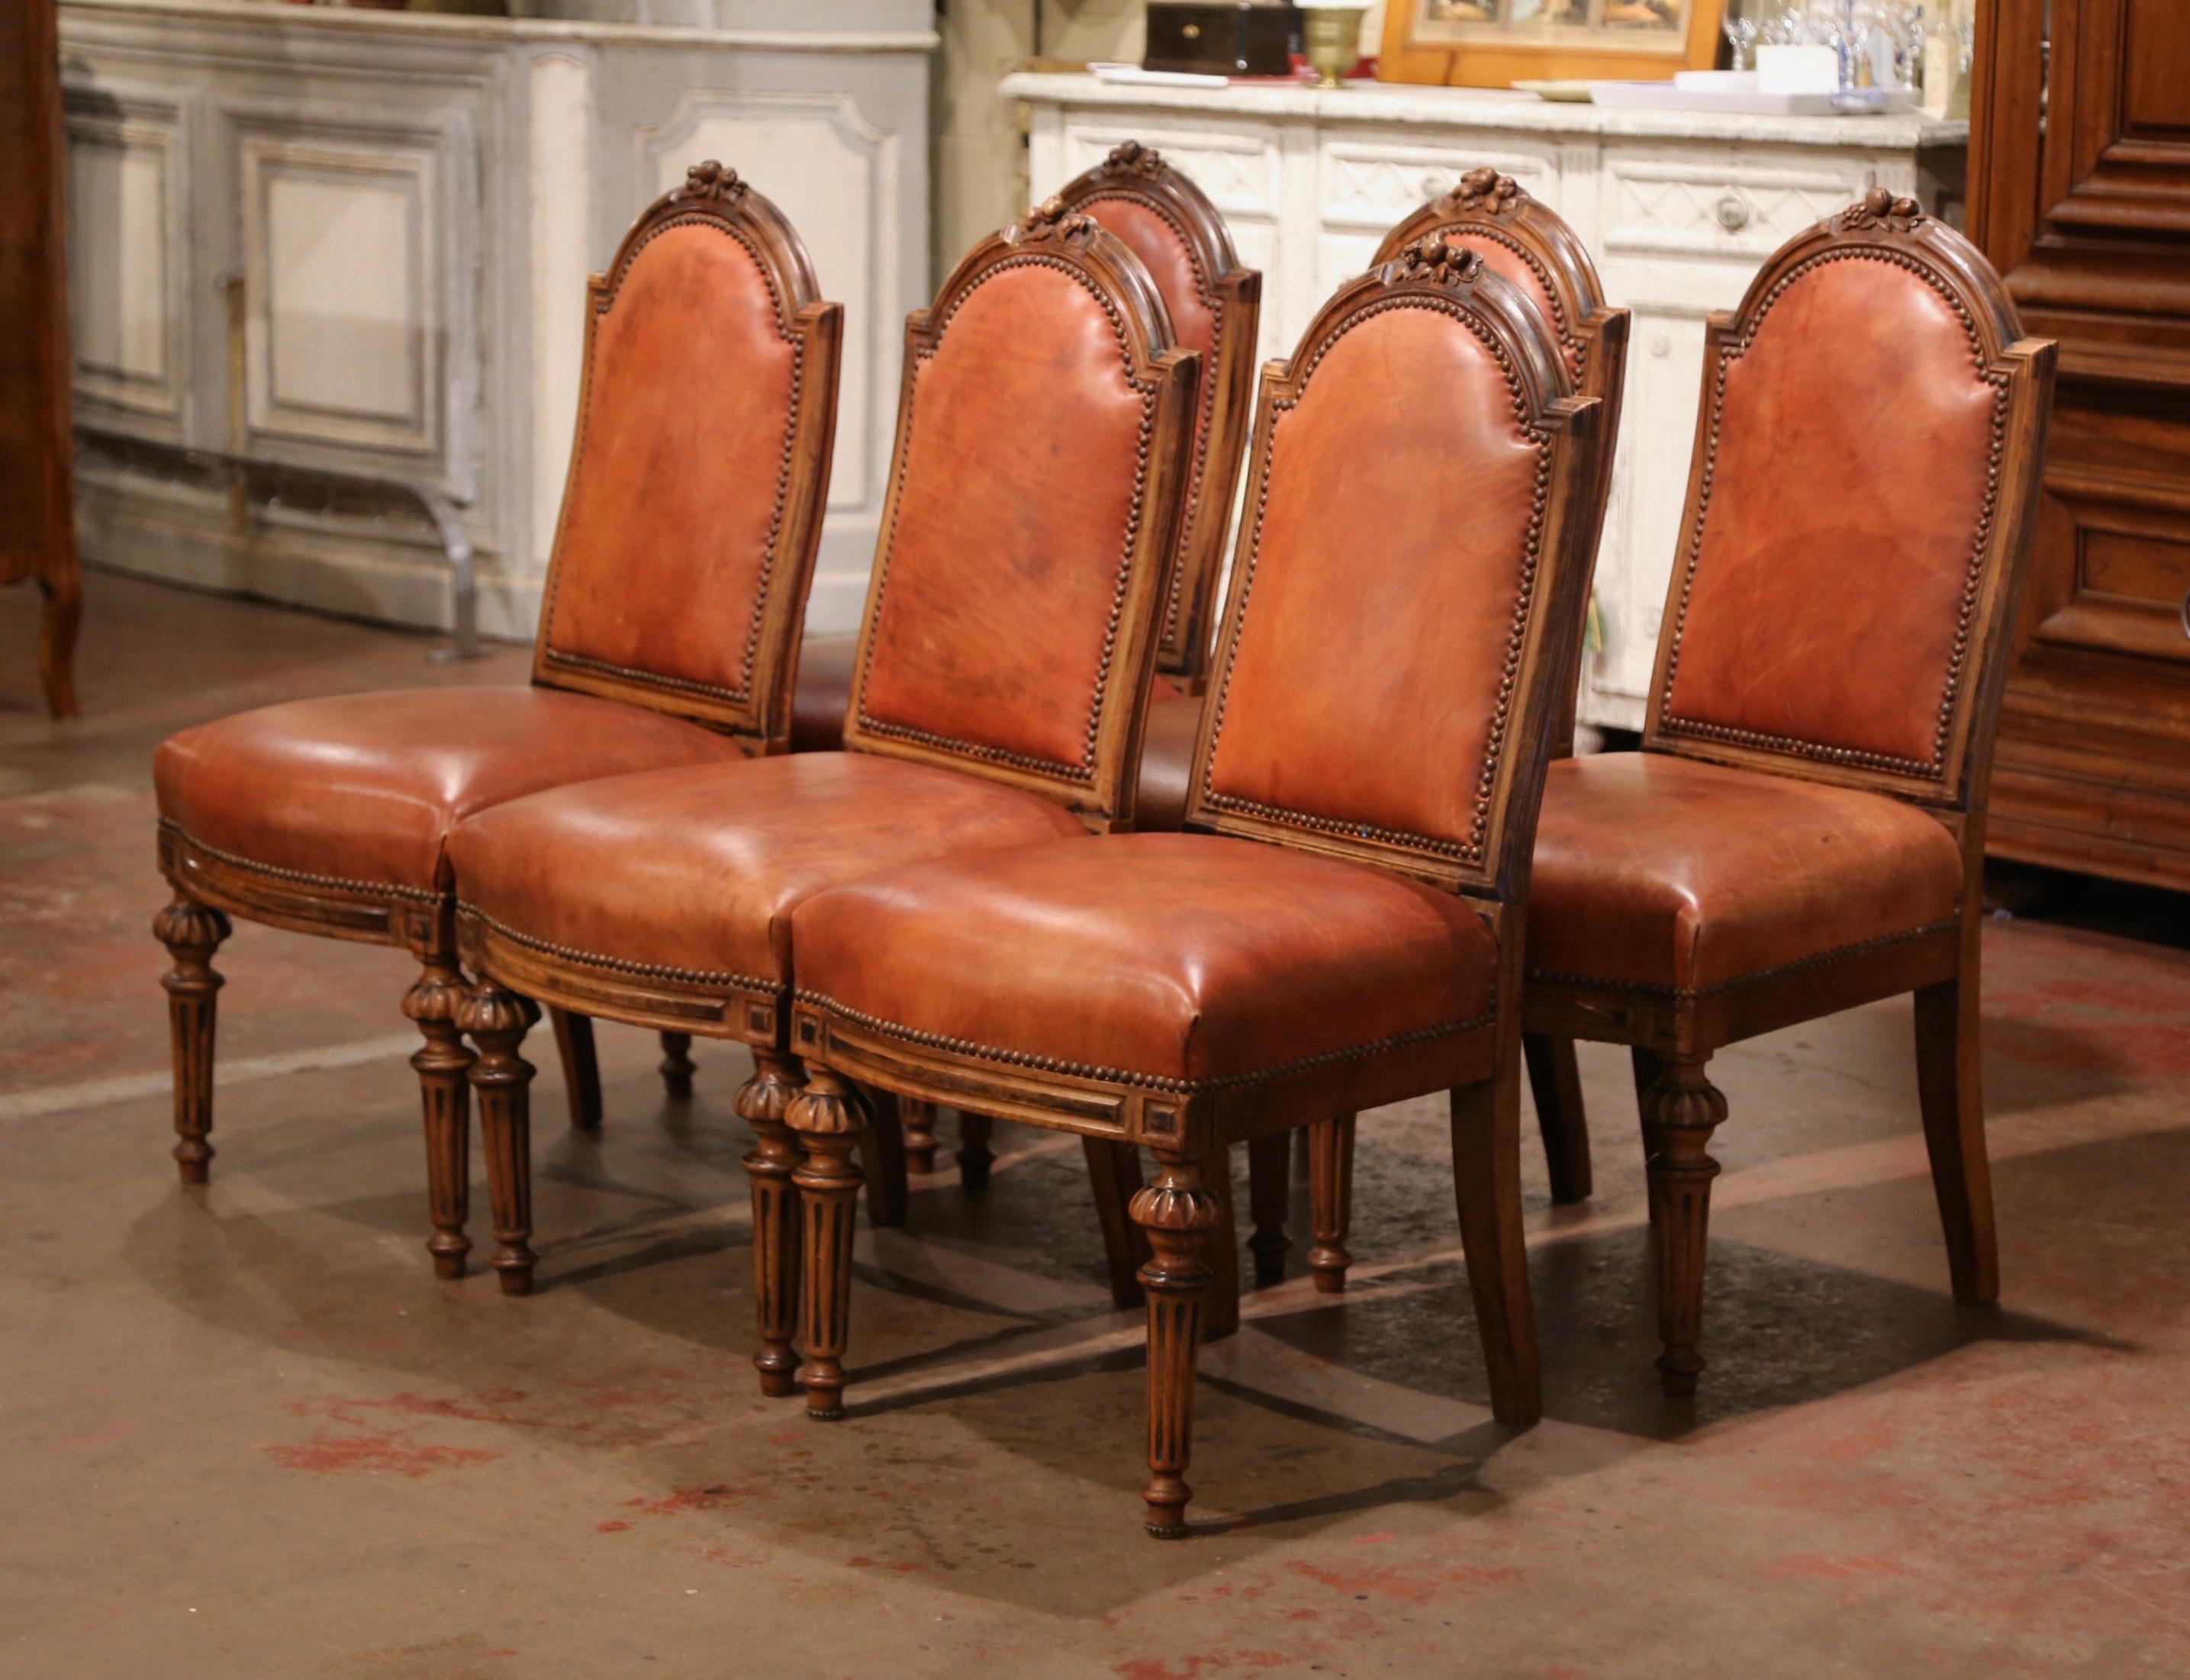 Dress a dining table or breakfast room with this elegant suite of antique chairs. Crafted in France, circa 1870, each side chair stands on tapered and fluted legs, decorated with turned motifs at the shoulder. Each chair has an arched back